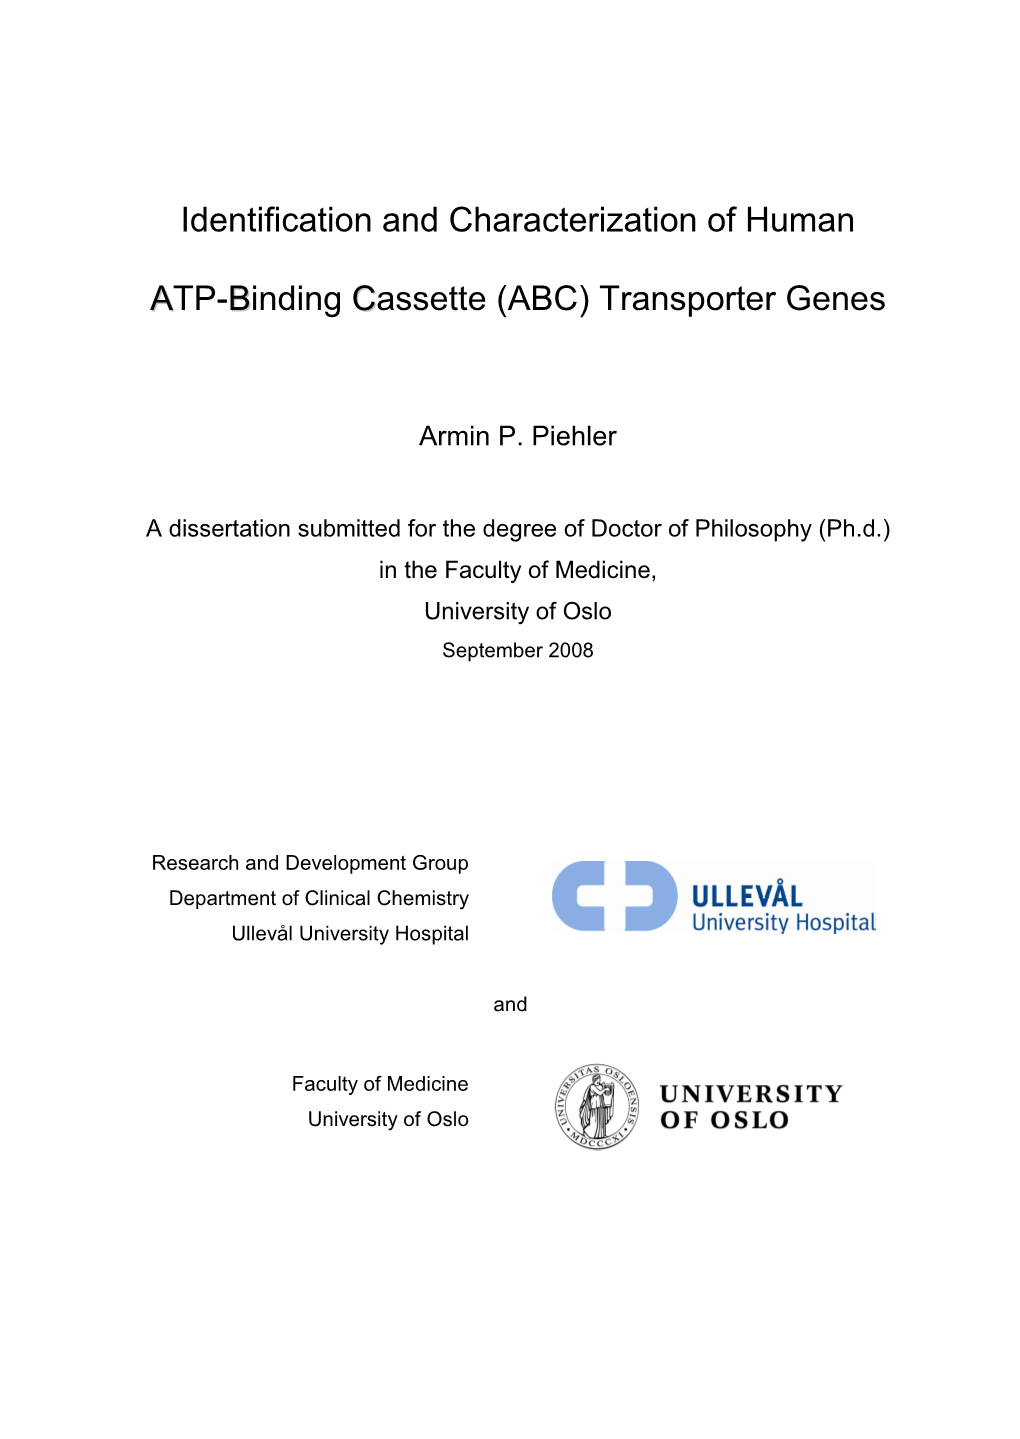 Identification and Characterization of Human AATP.Bbinding Ccassette (ABC) Transporter Genes